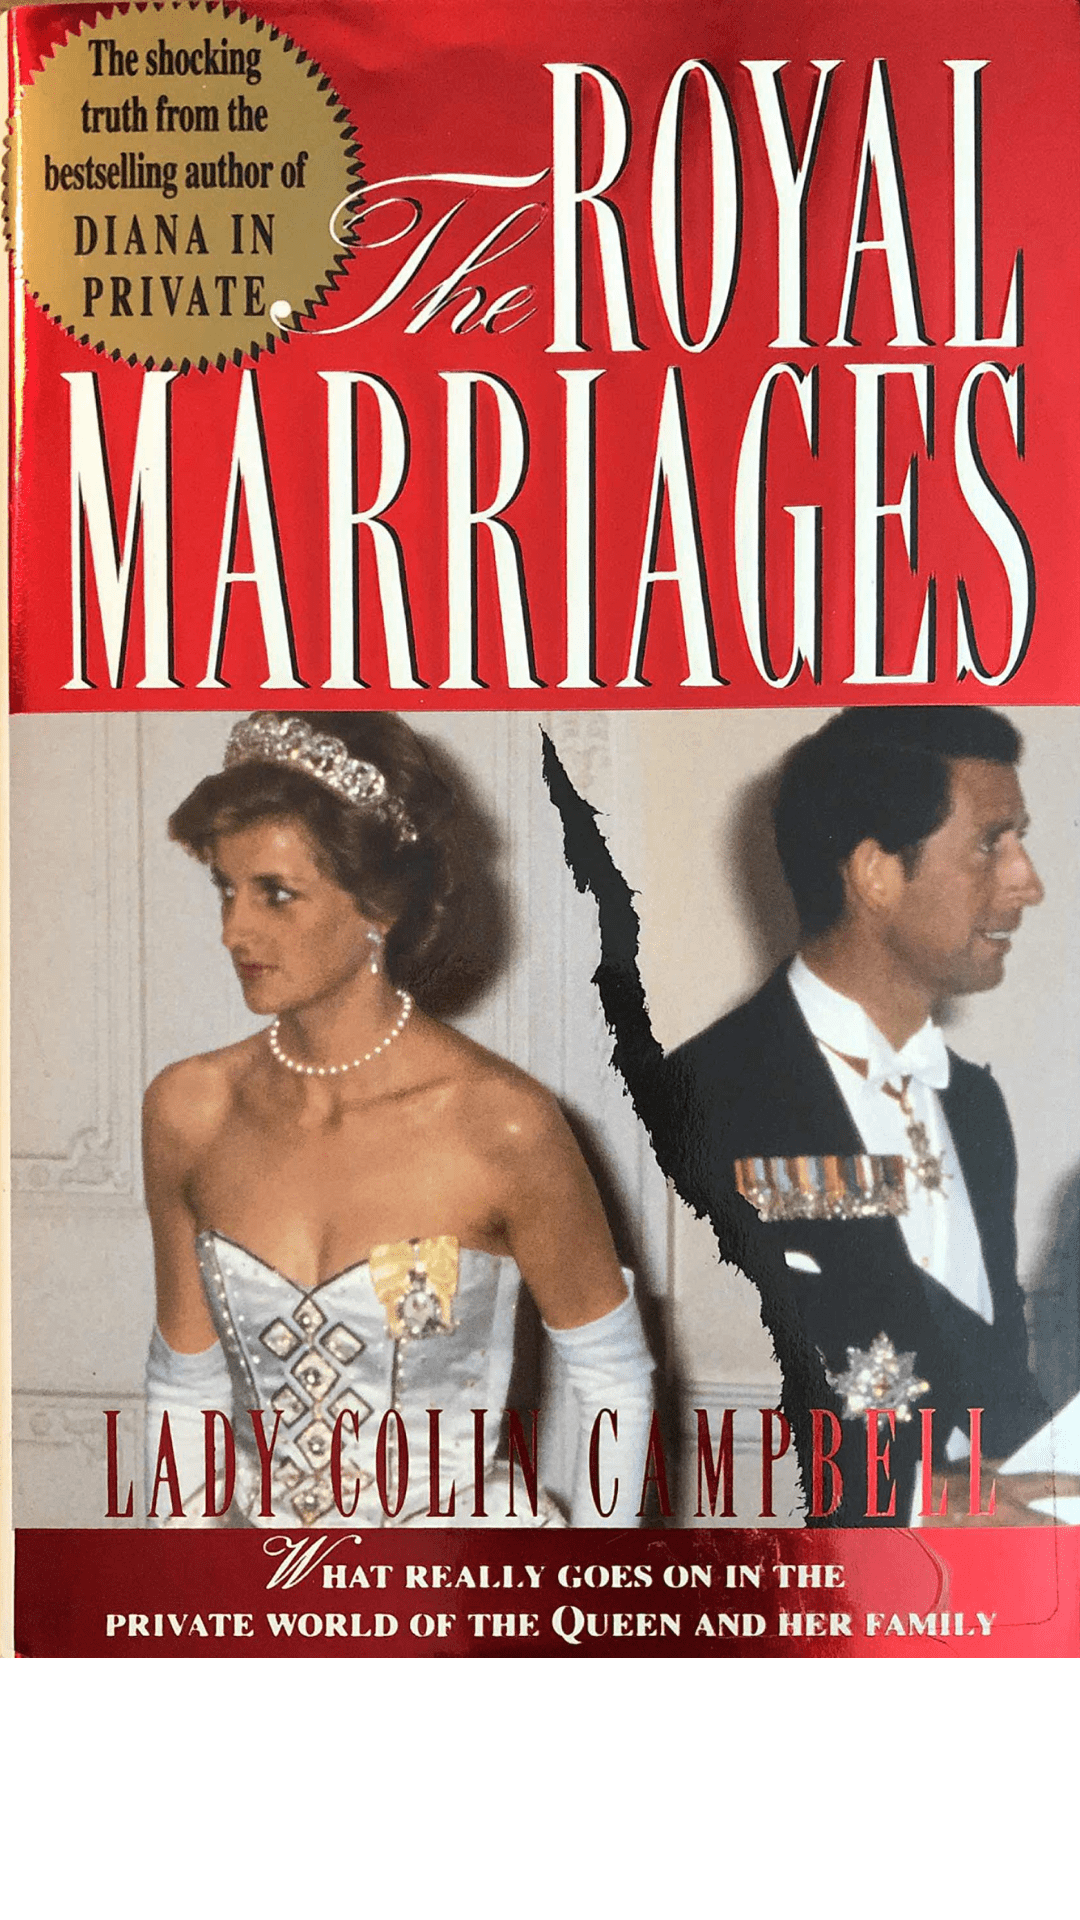 The Royal Marriages